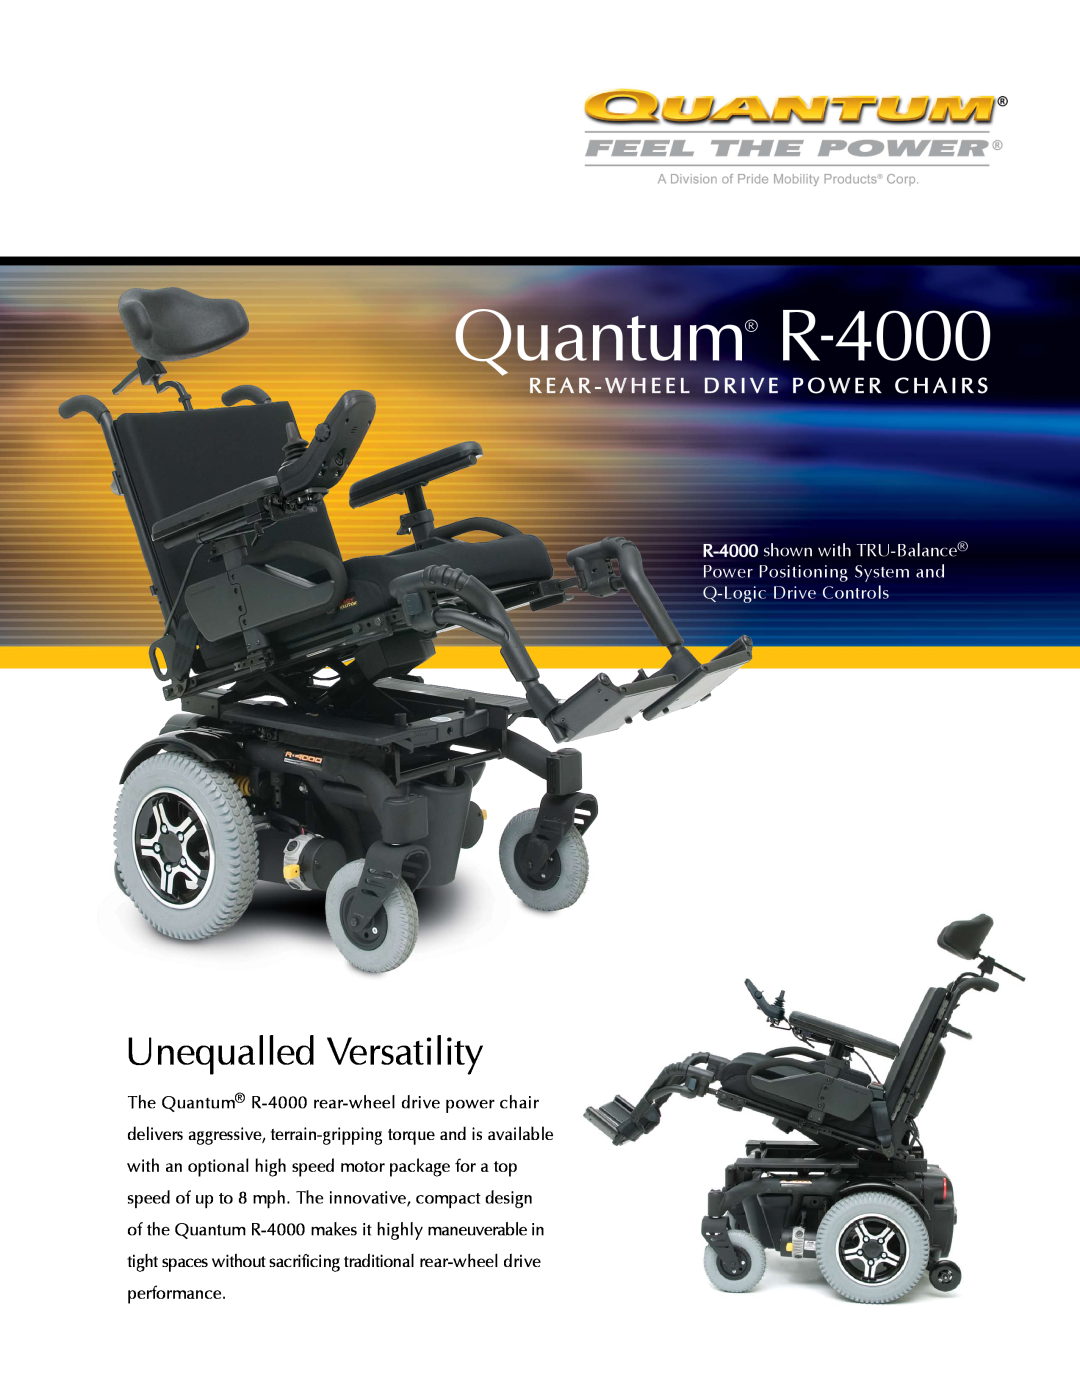 Pride Mobility Quantum R-4000 manual Unequalled Versatility, R E A R - W H E E L D R I V E P O W E R C H A I R S 